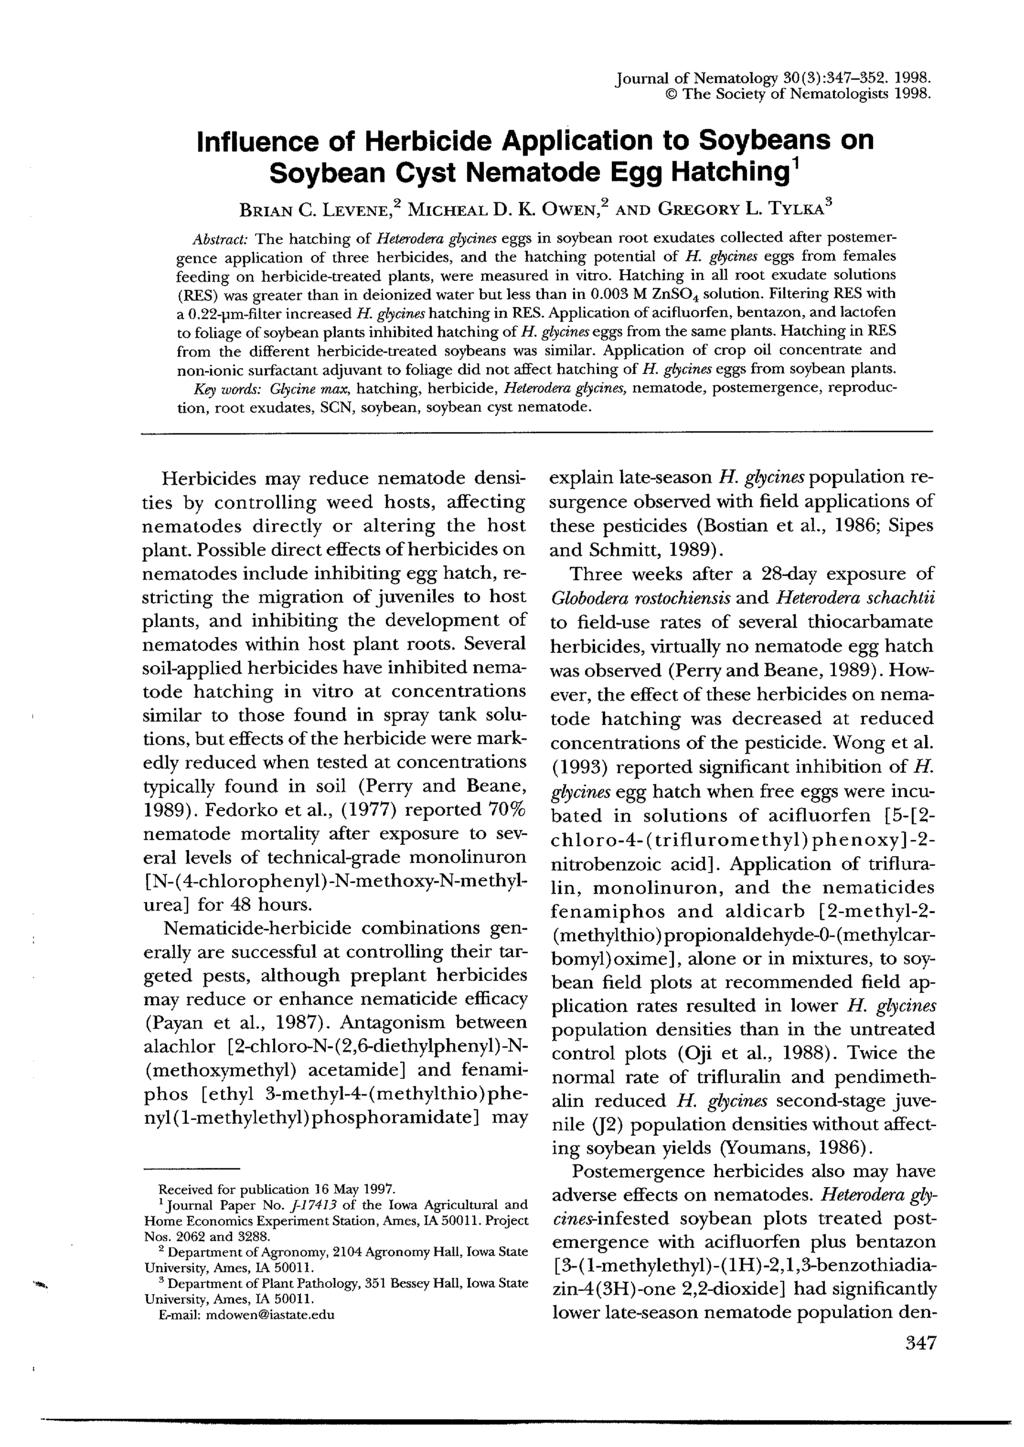 Journal of Nematology 30 (3) :347-352.1998. The Society of Nematologists 1998. Influence of Herbicide Application to Soybeans on Soybean Cyst Nematode Egg Hatching 1 BRIAN C. LEVENE, 2 MICHEAL D. K.